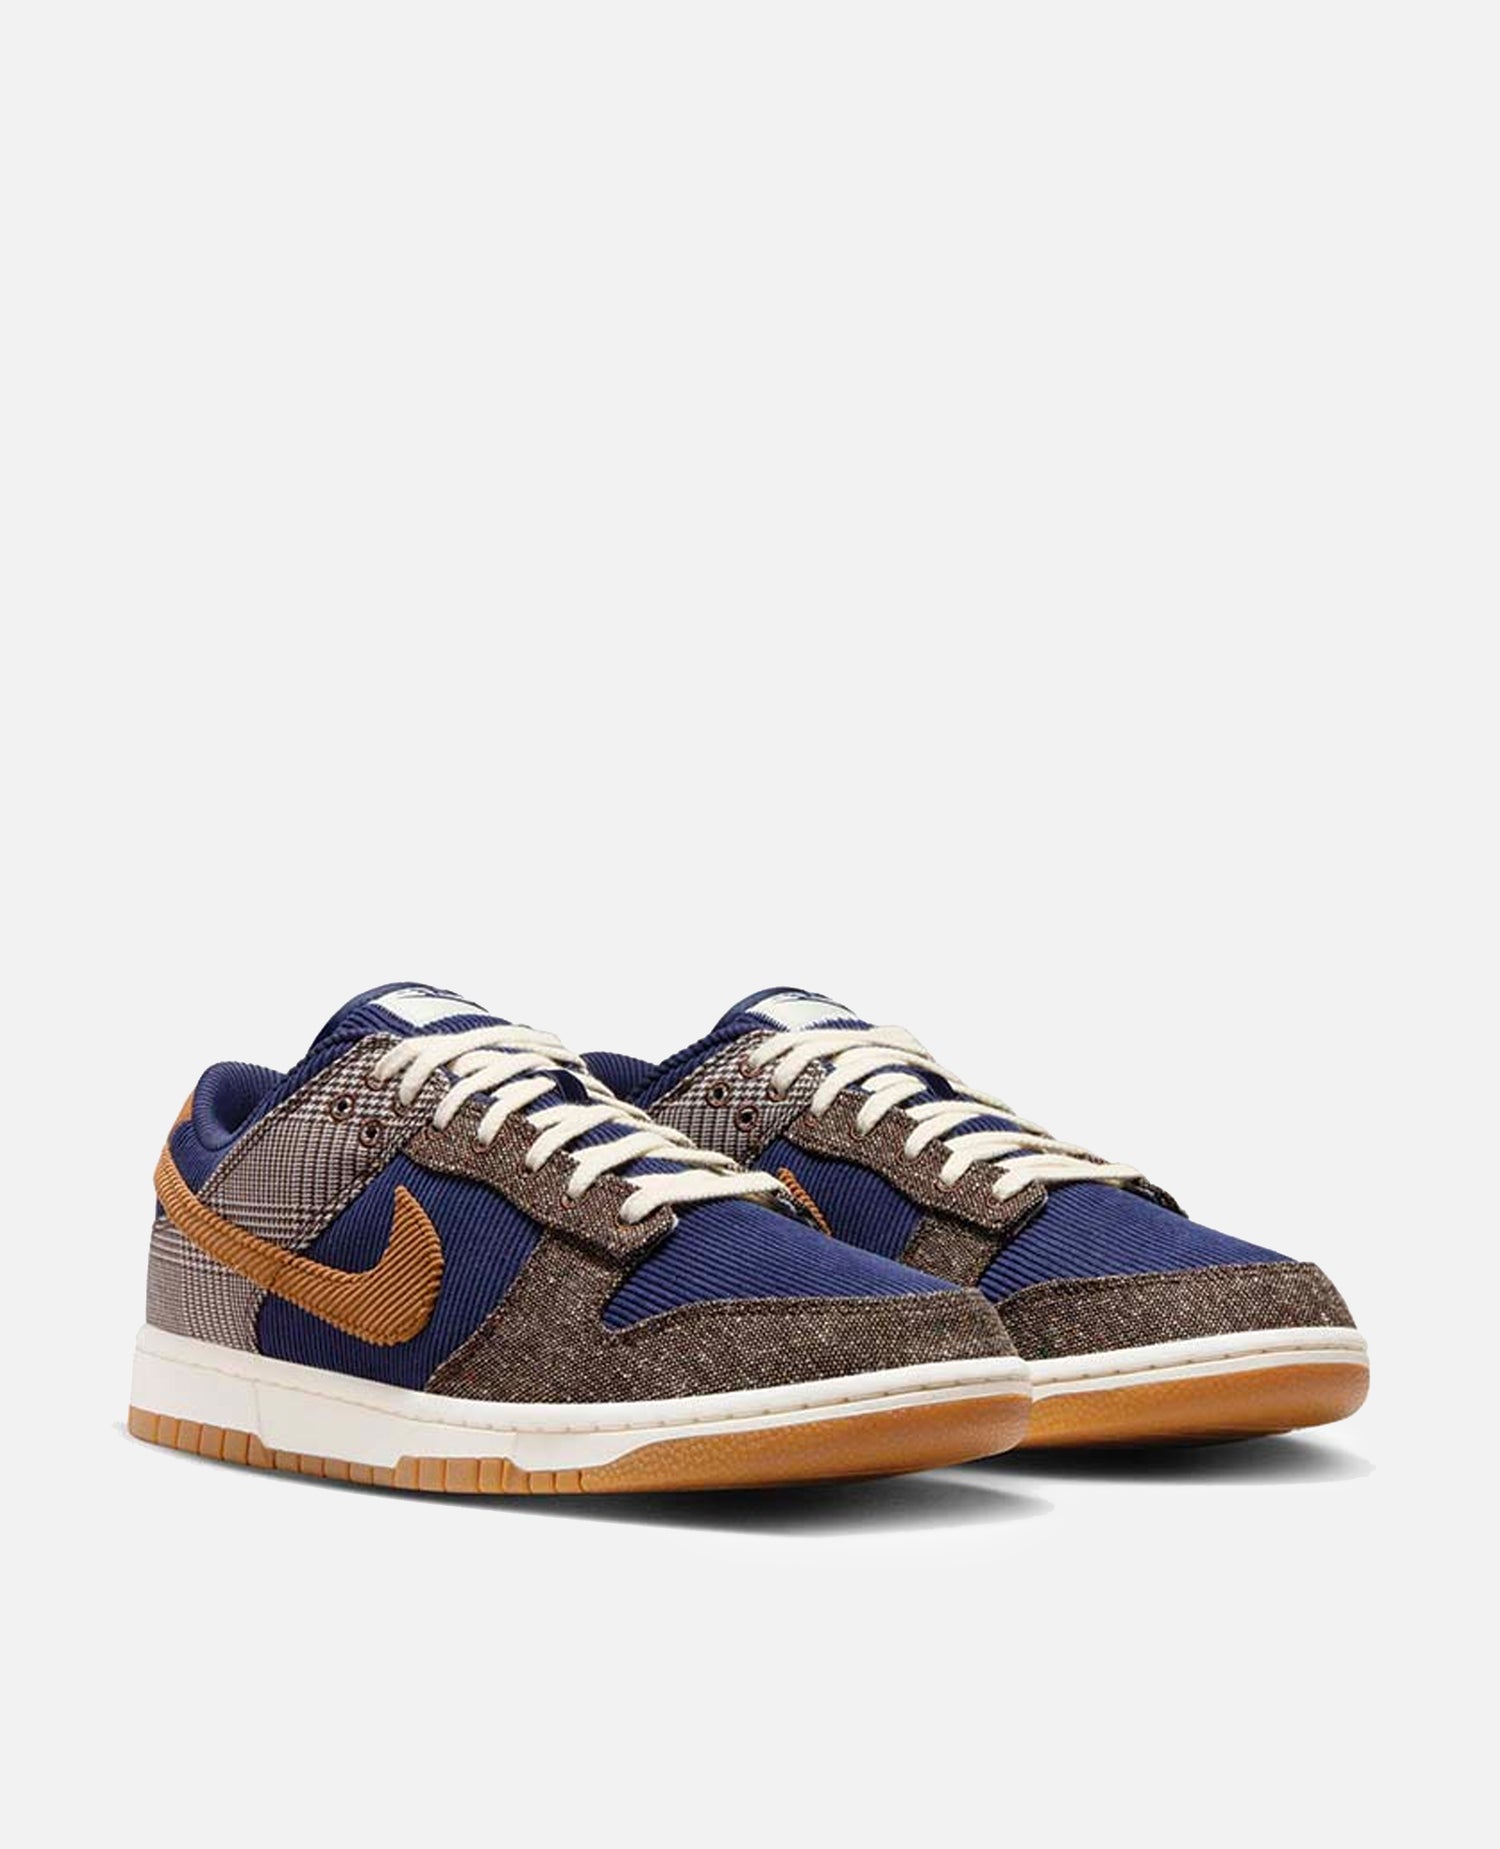 Nike Dunk Low Prm (Midnight Navy/Ale Brown-Pale Ivory)